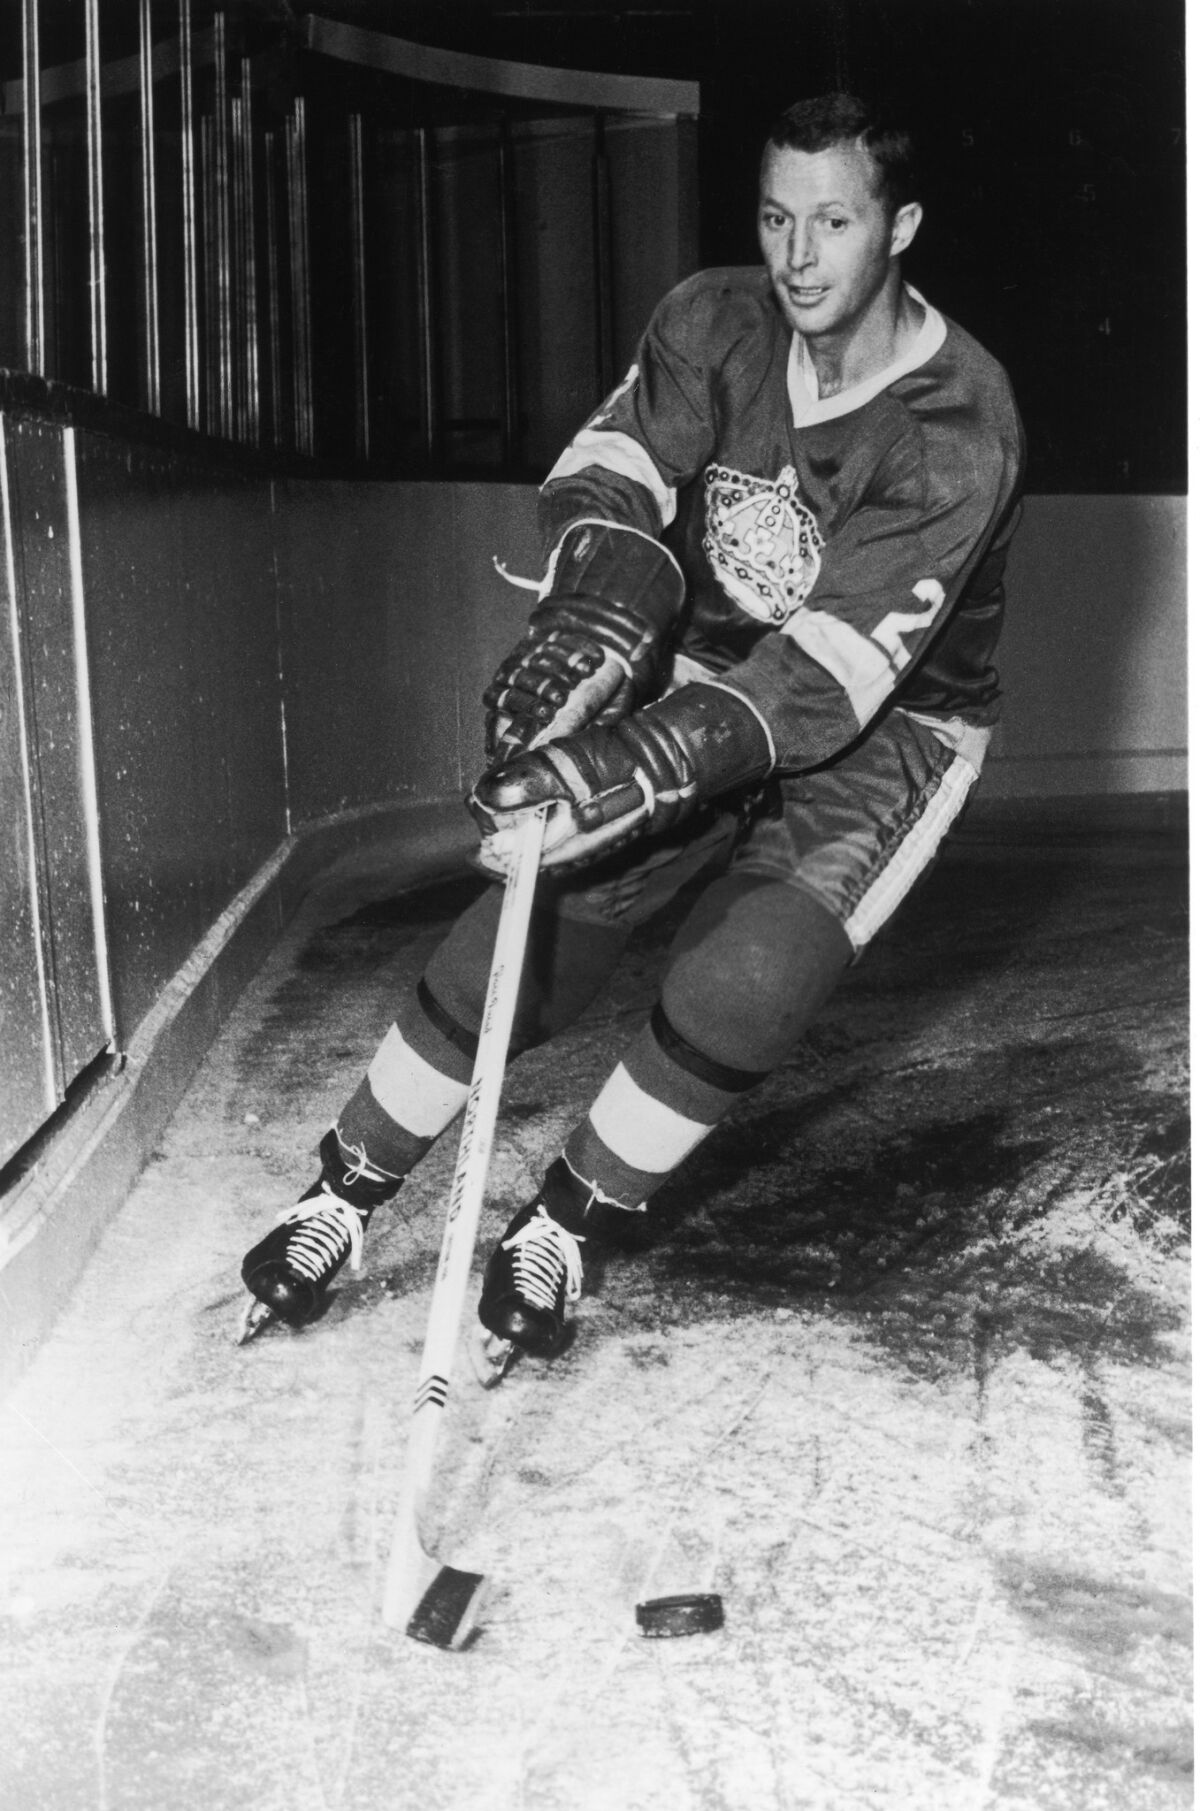 The Kings' Bob Wall takes to the ice for a promotional photo in the late 1960s.